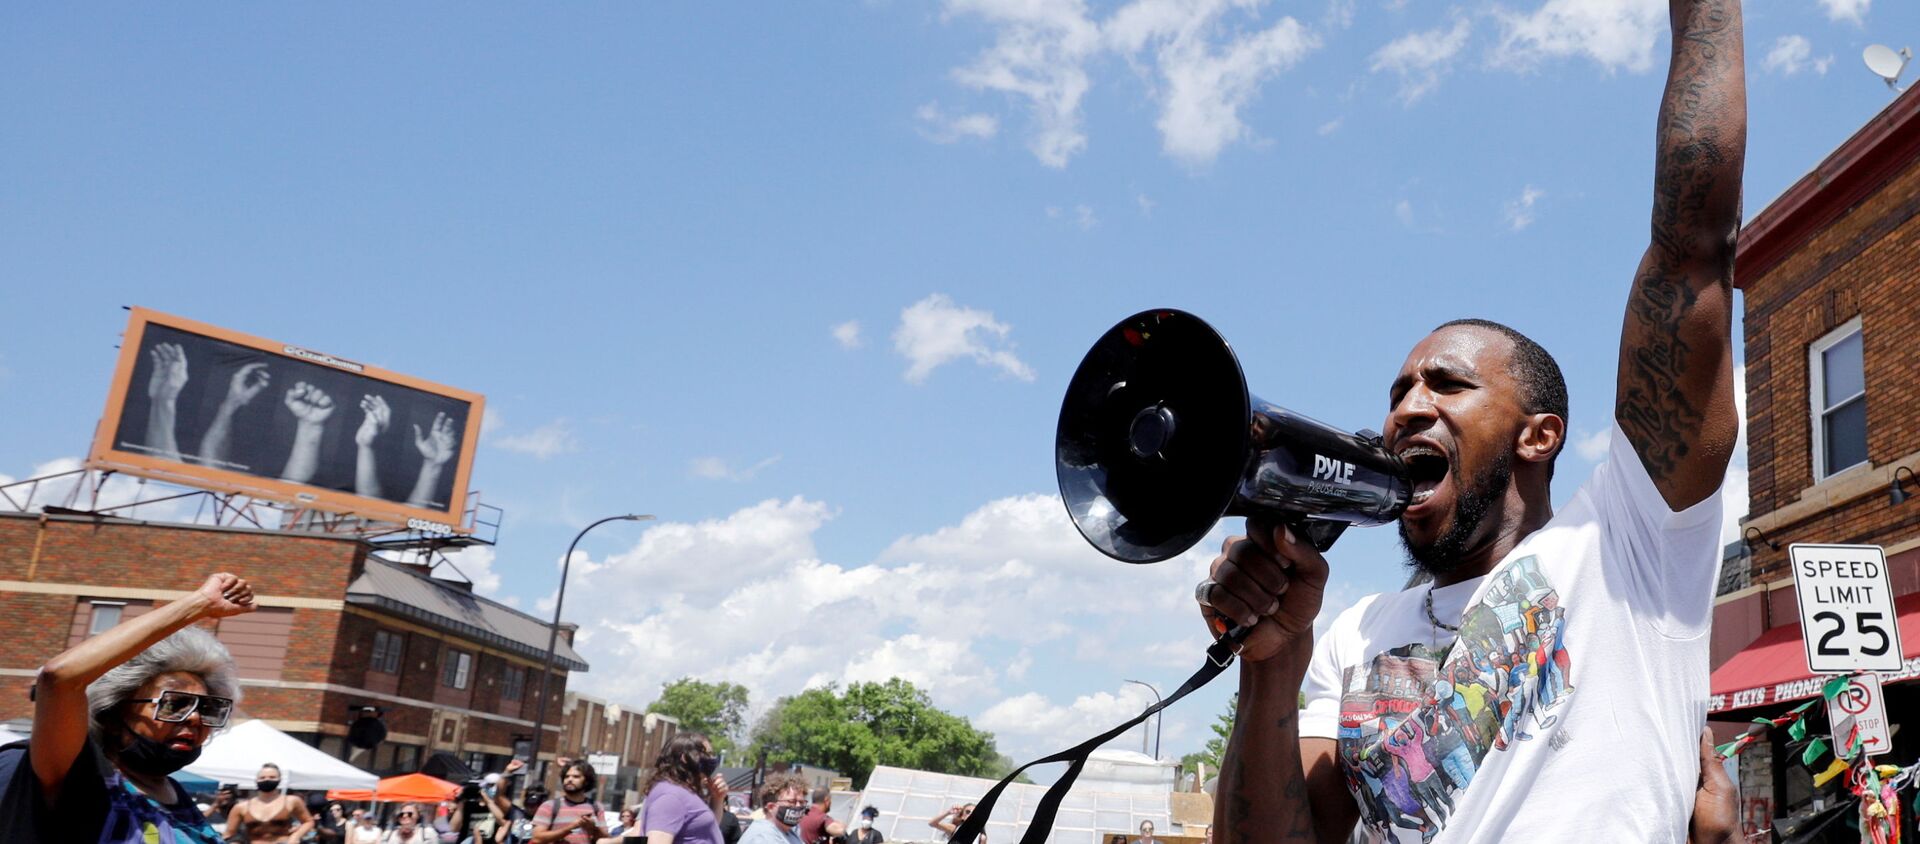 Community organizer Tommy McBrayer leads a chant in solidarity with George Floyd on the first anniversary of his death, at George Floyd Square, in Minneapolis, Minnesota, U.S., May 25, 2021. - Sputnik International, 1920, 26.05.2021